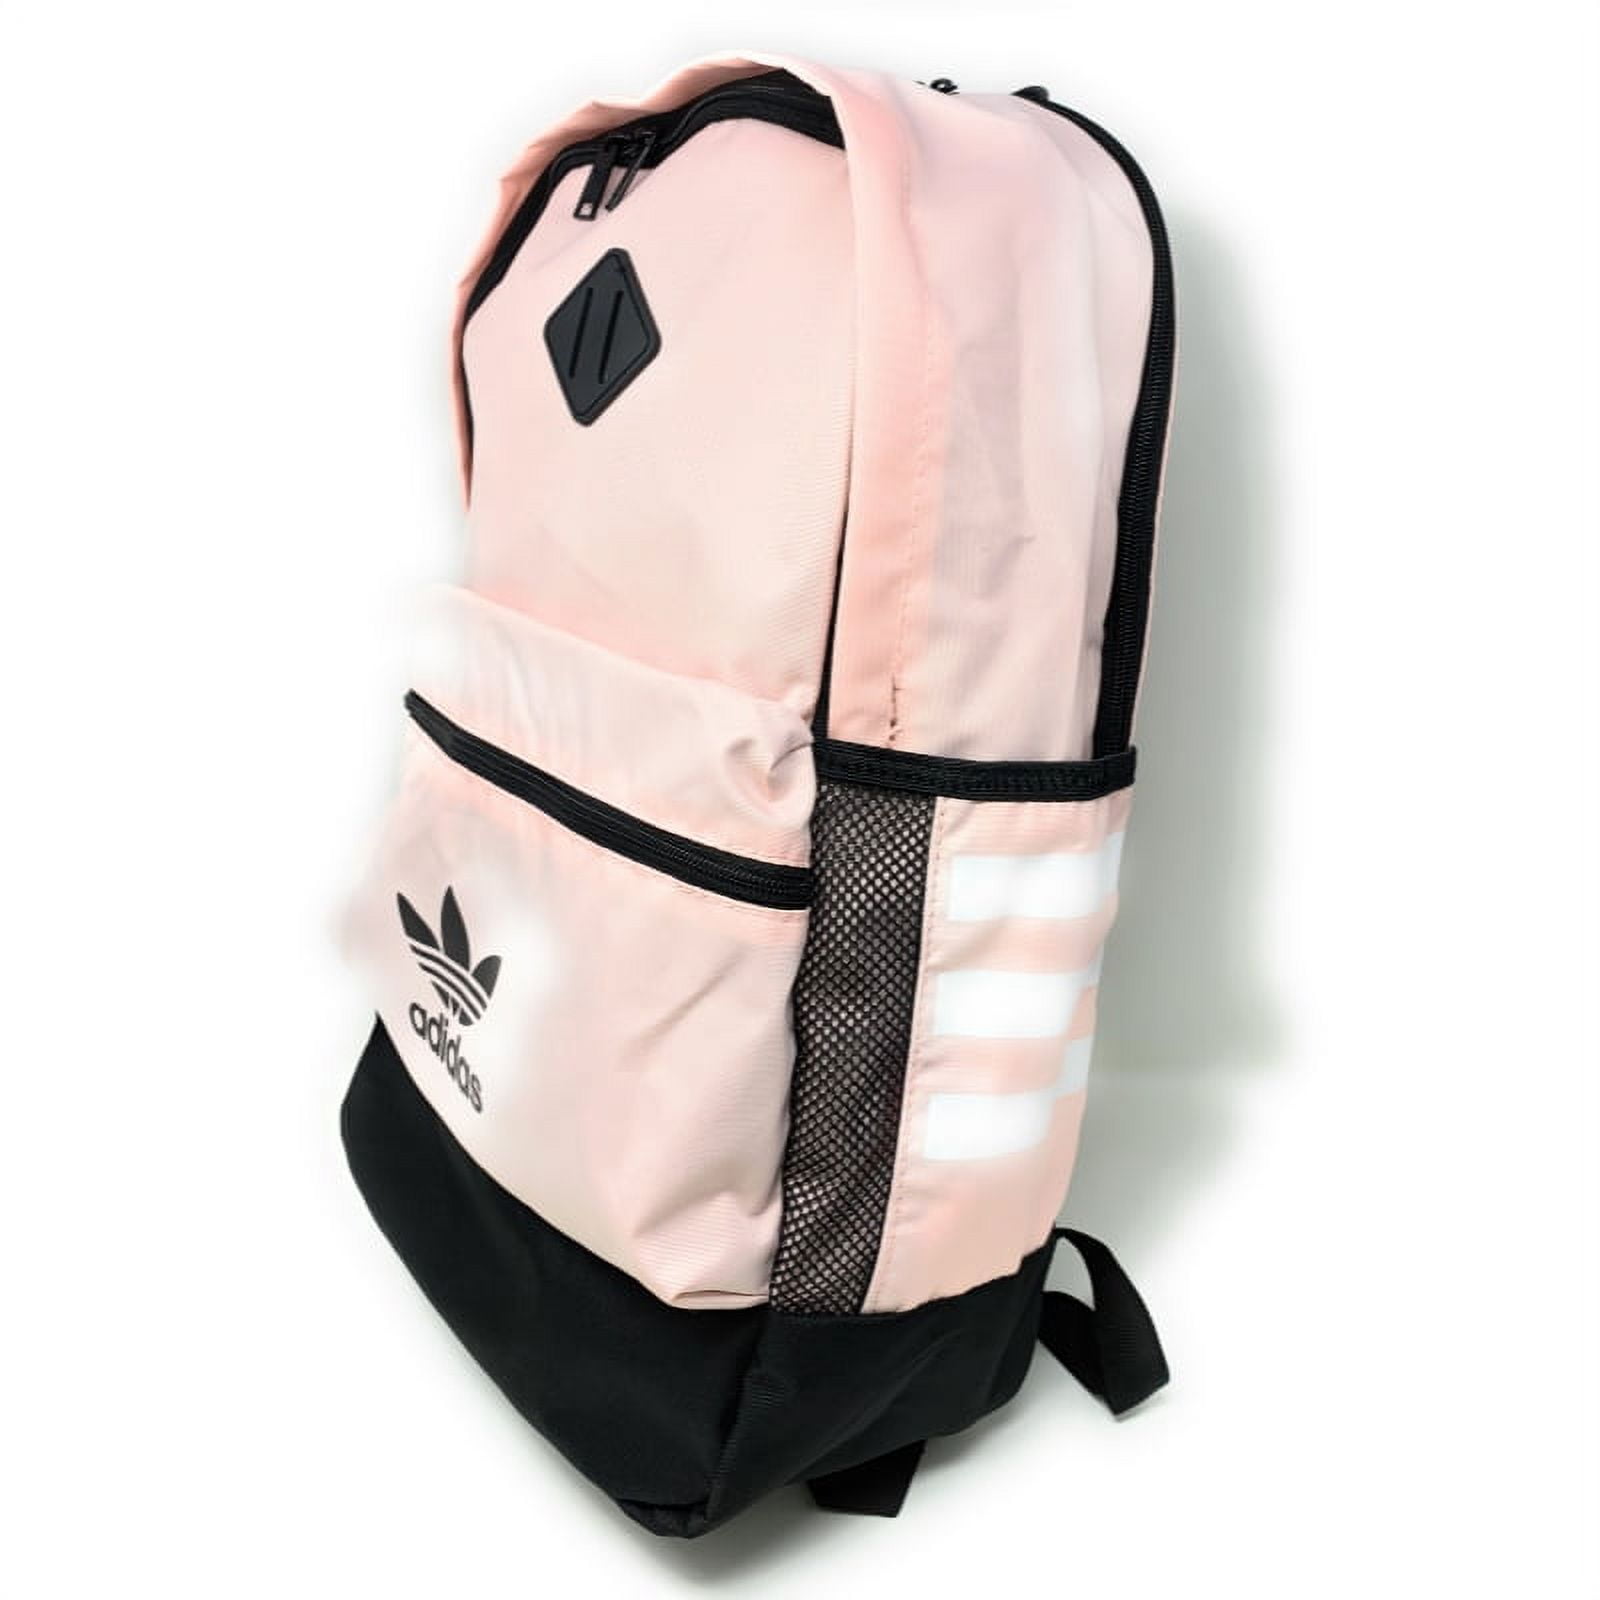 Buy Addidas Bags Online in India | Myntra